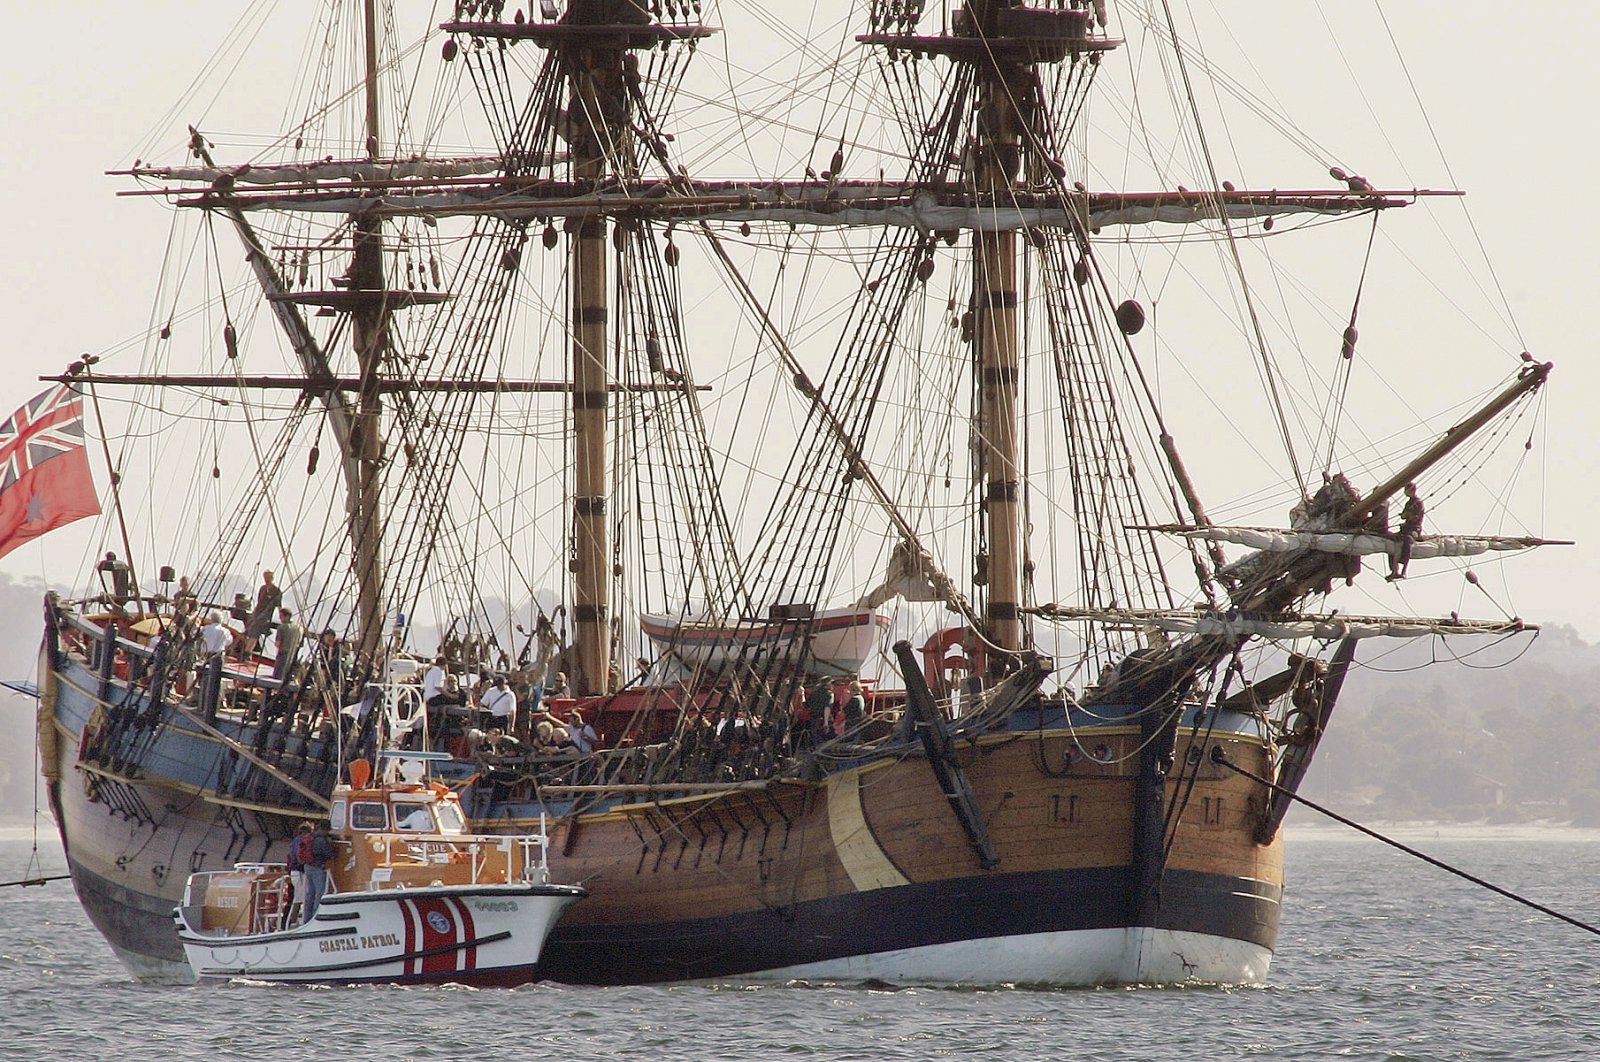 A replica of the ship the Endeavour is at anchor in Botany Bay, Sydney, Australia, April 17, 2005.  (AP Photo)